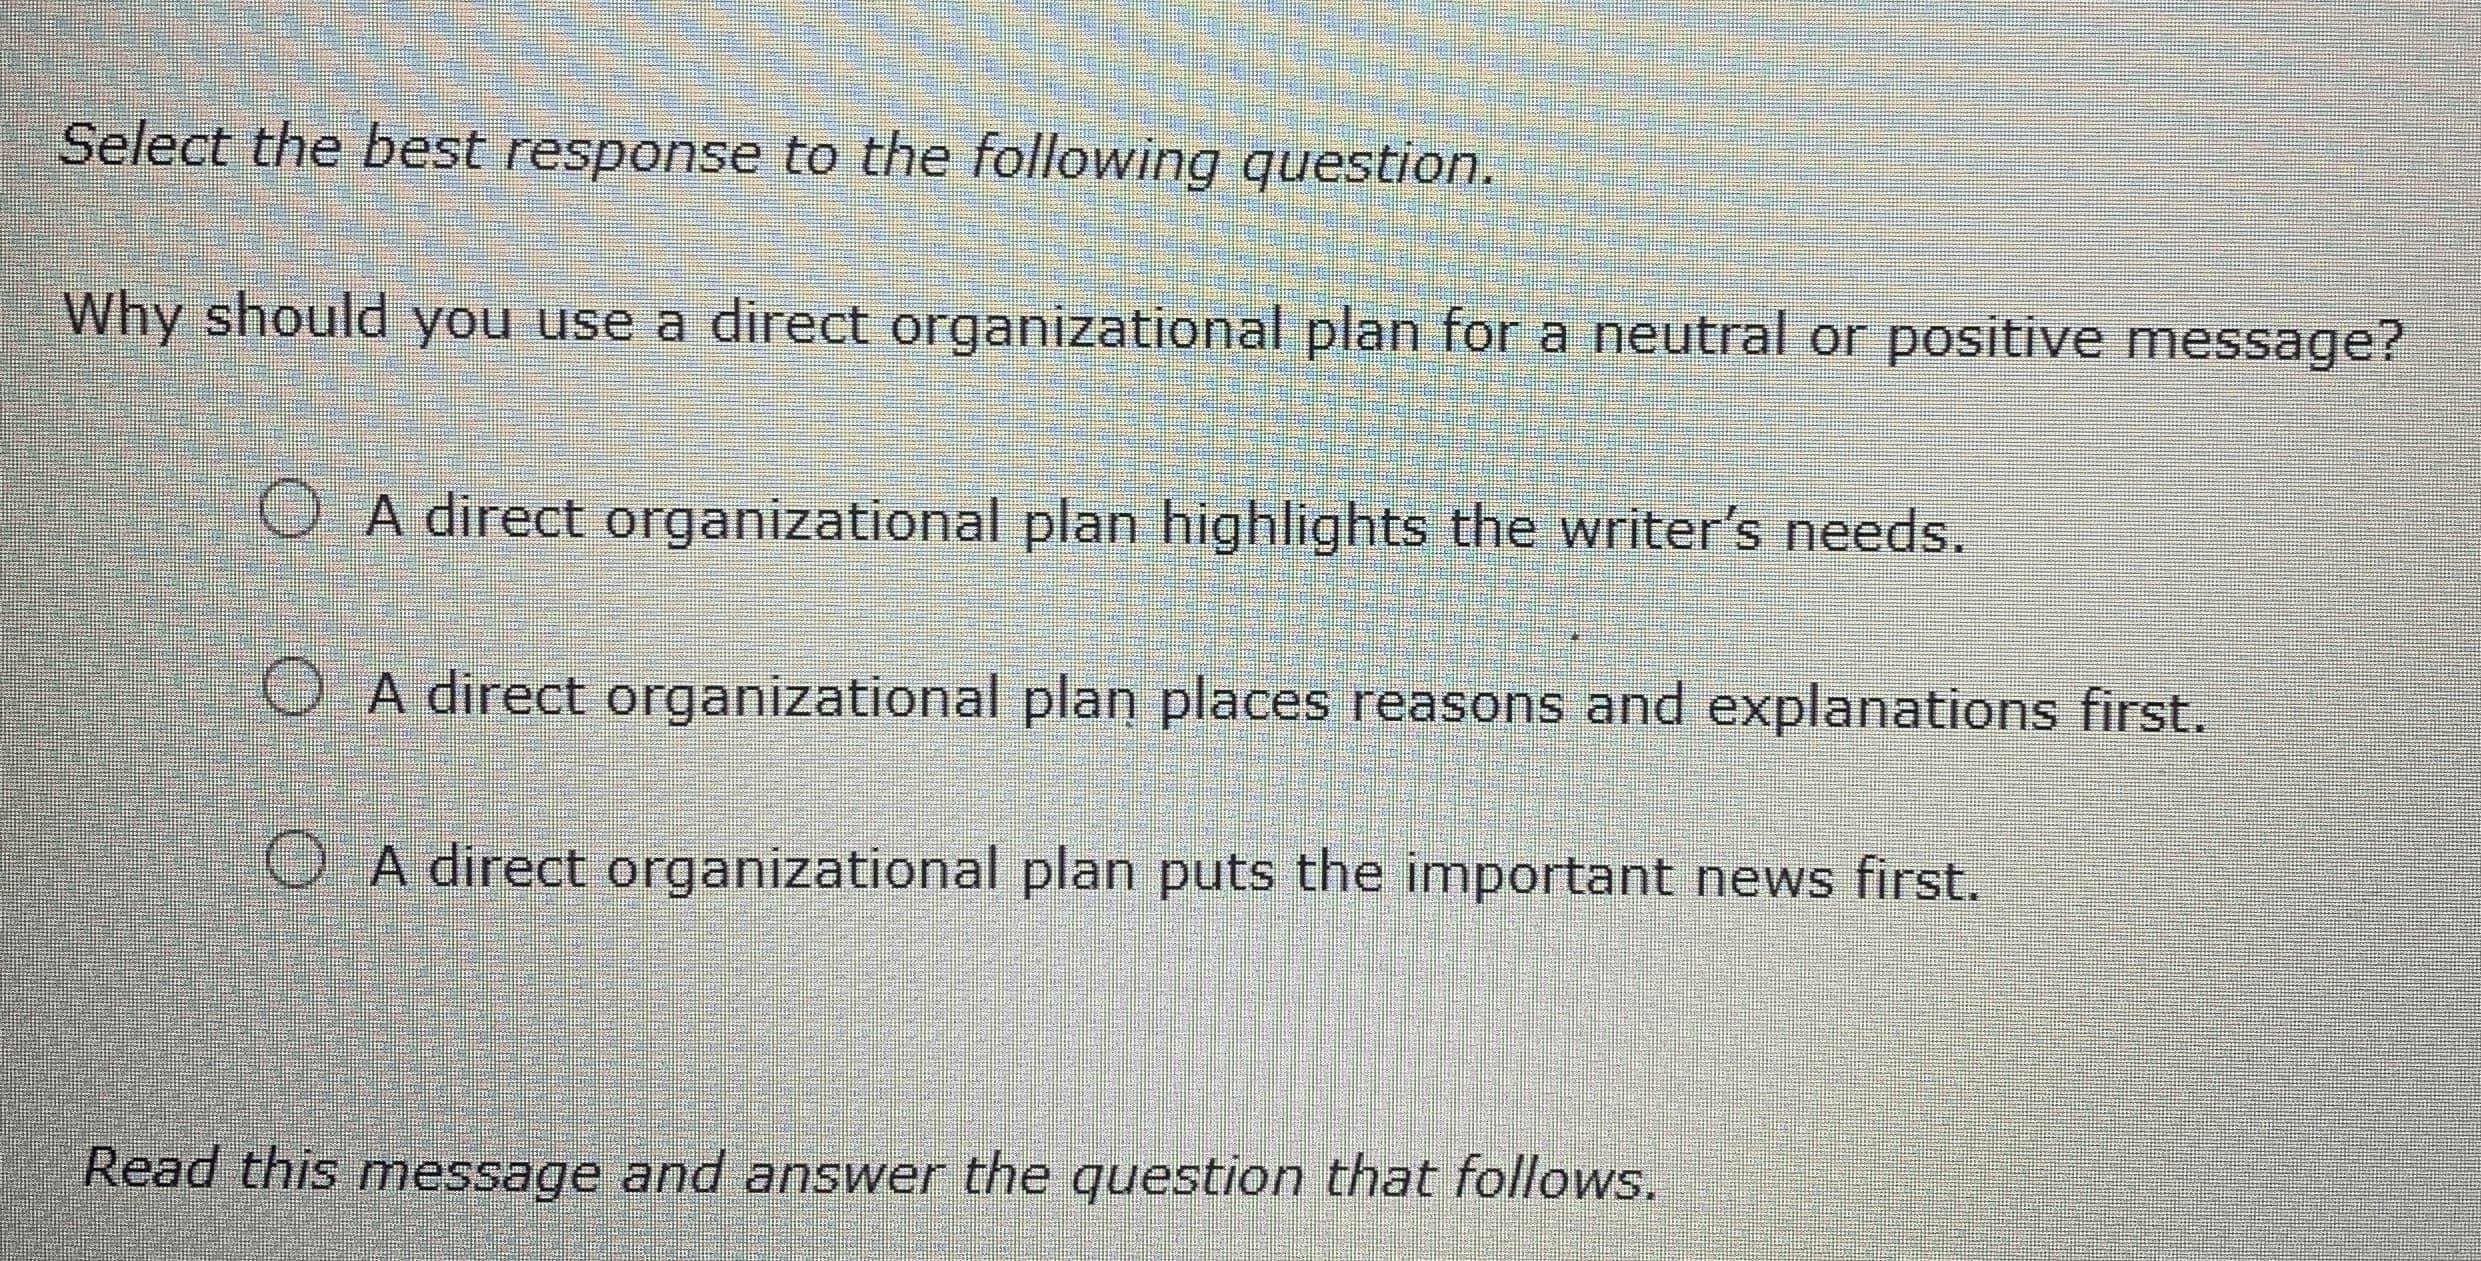 Select the best response to the following question.
Why should you use a direct organizational plan for a neutral or positive message?
O A direct organizational plan highlights the writer's needs.
O A direct organizational plan places reasons and explanations first.
O A direct organizational plan puts the important news first.
Read this message and answer the question that follows.
